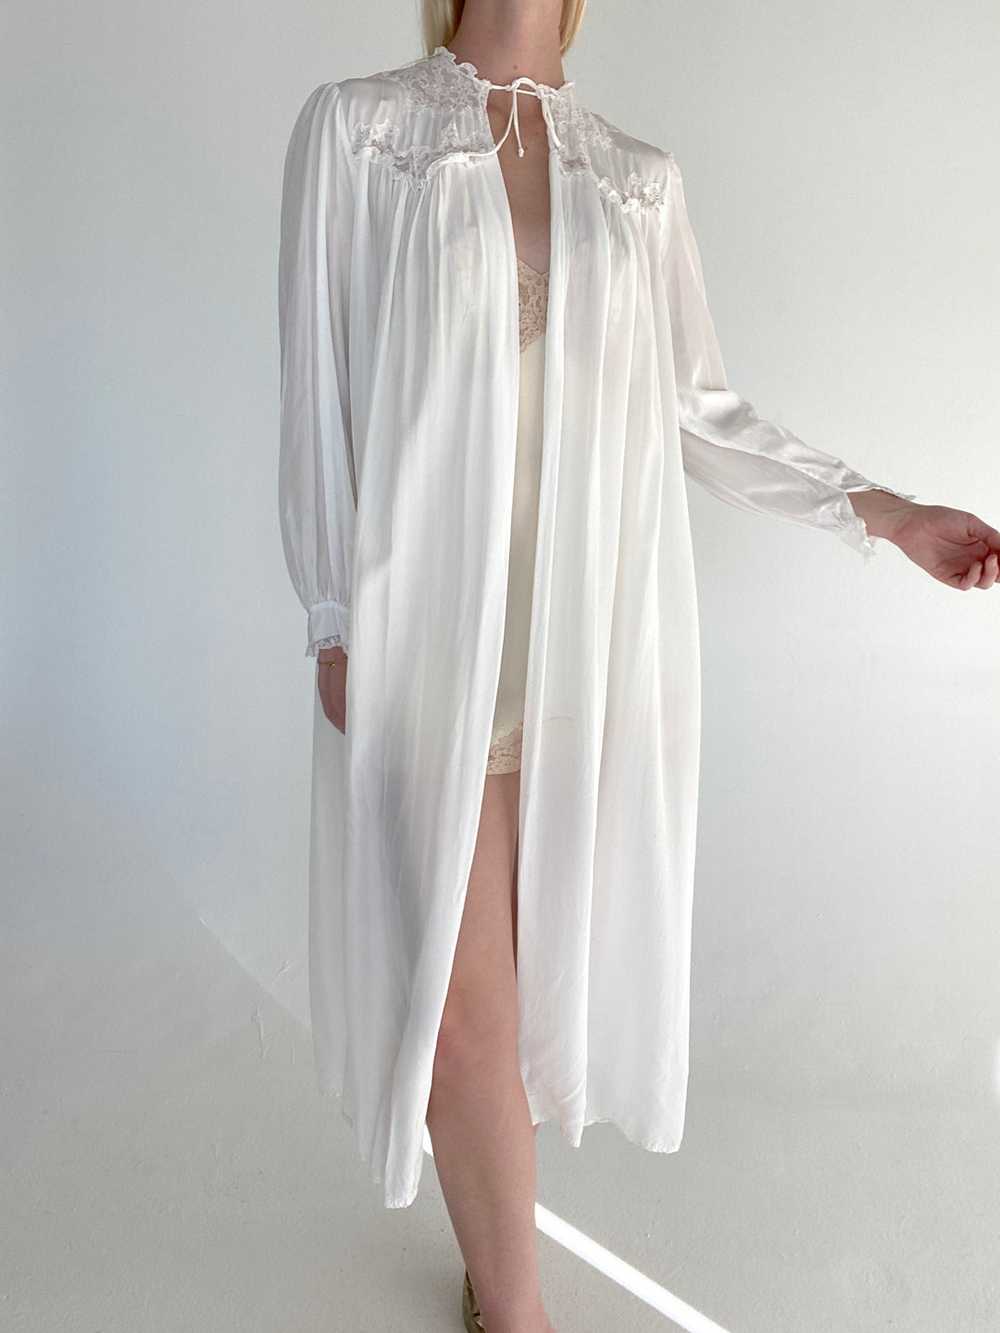 1930's Bridal White Robe With Lace - image 5